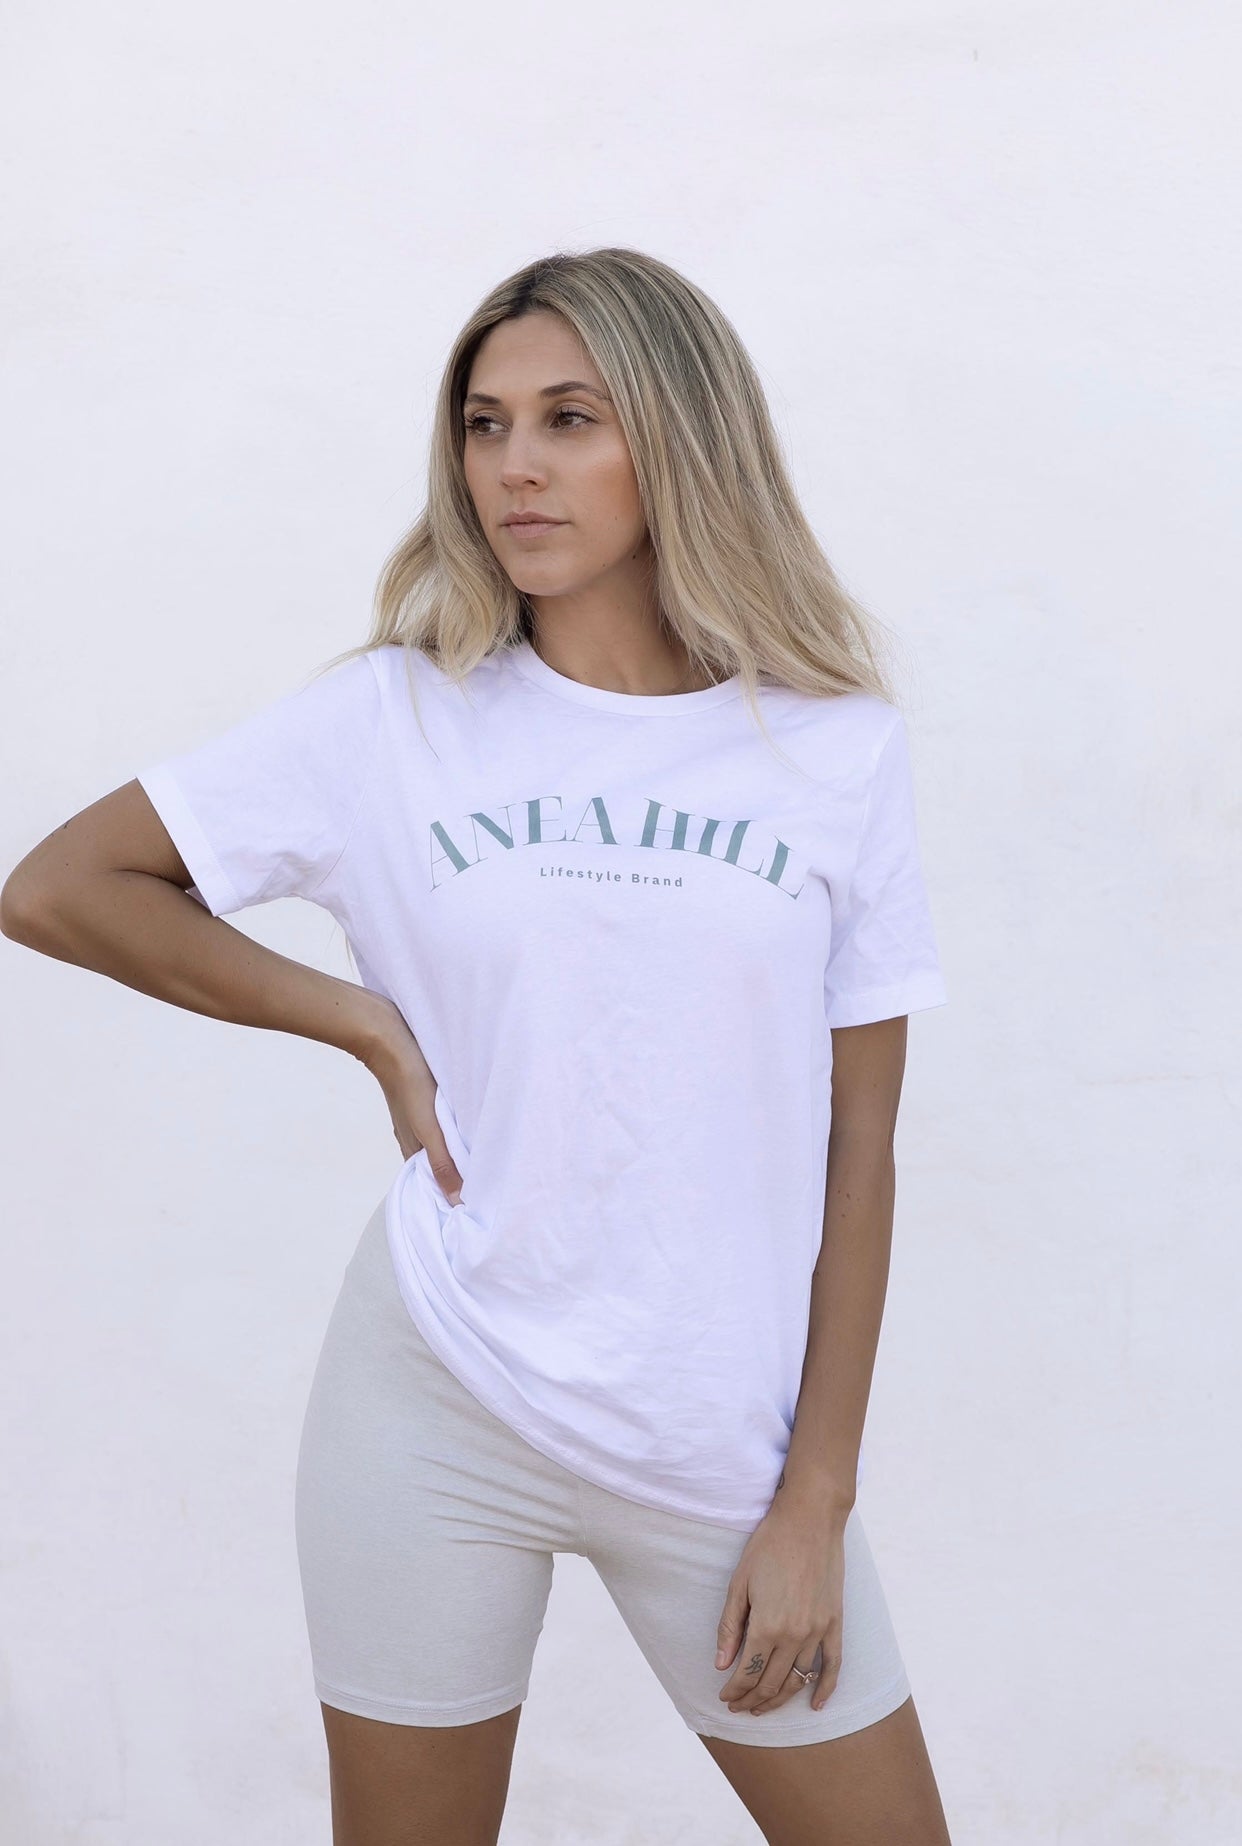 "Ah Signature Tee: Unleash Your Style with Timeless Elegance!"